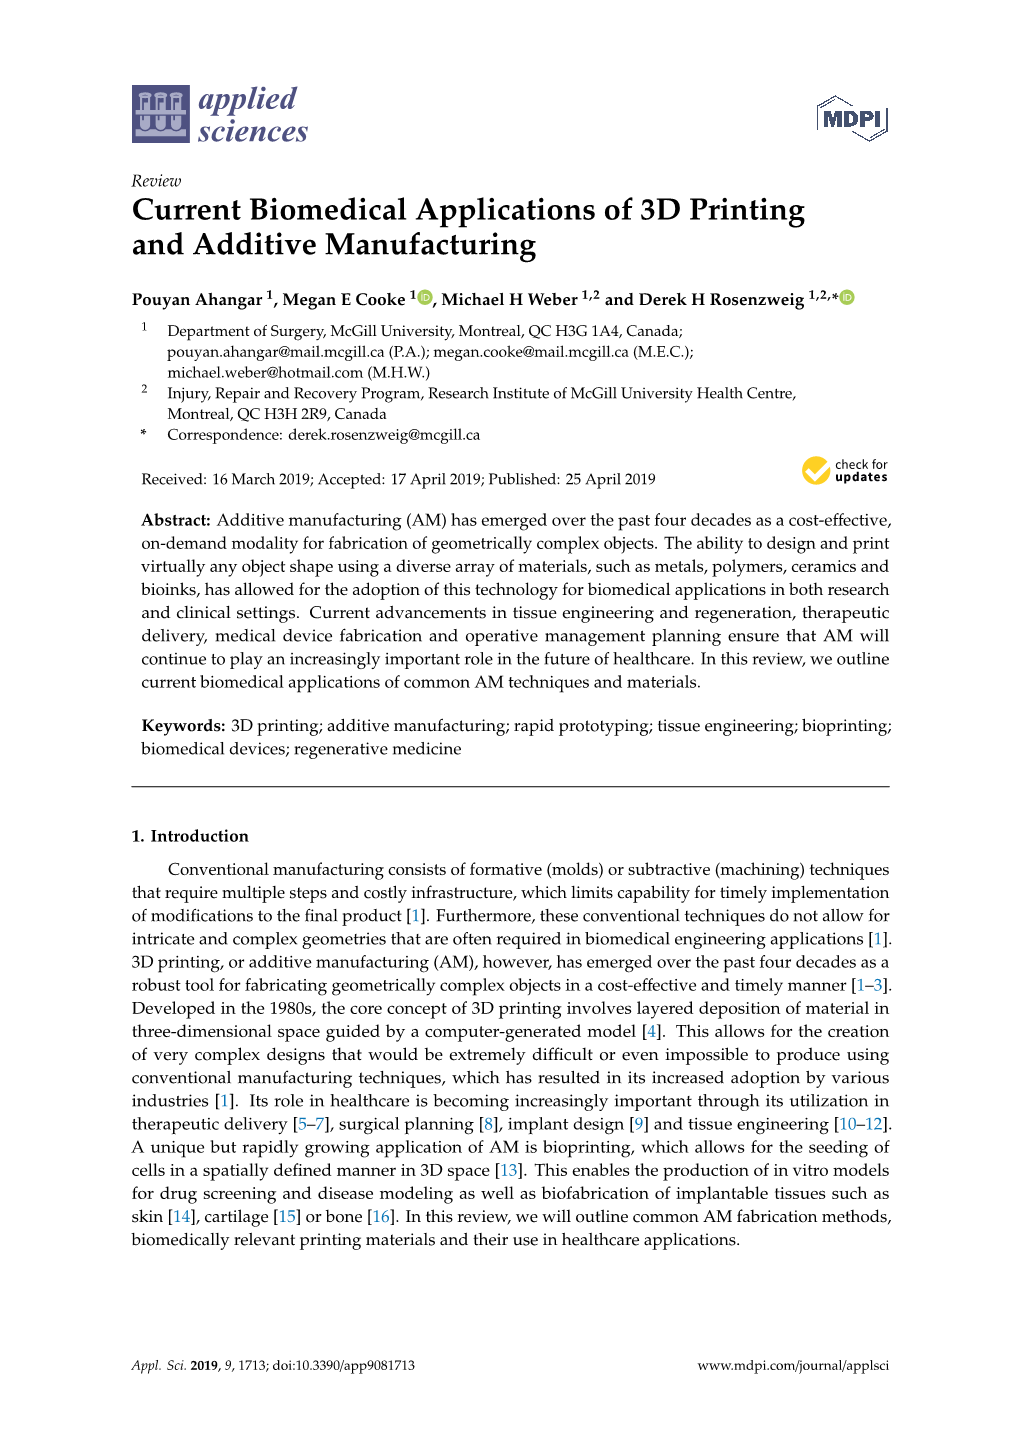 Current Biomedical Applications of 3D Printing and Additive Manufacturing